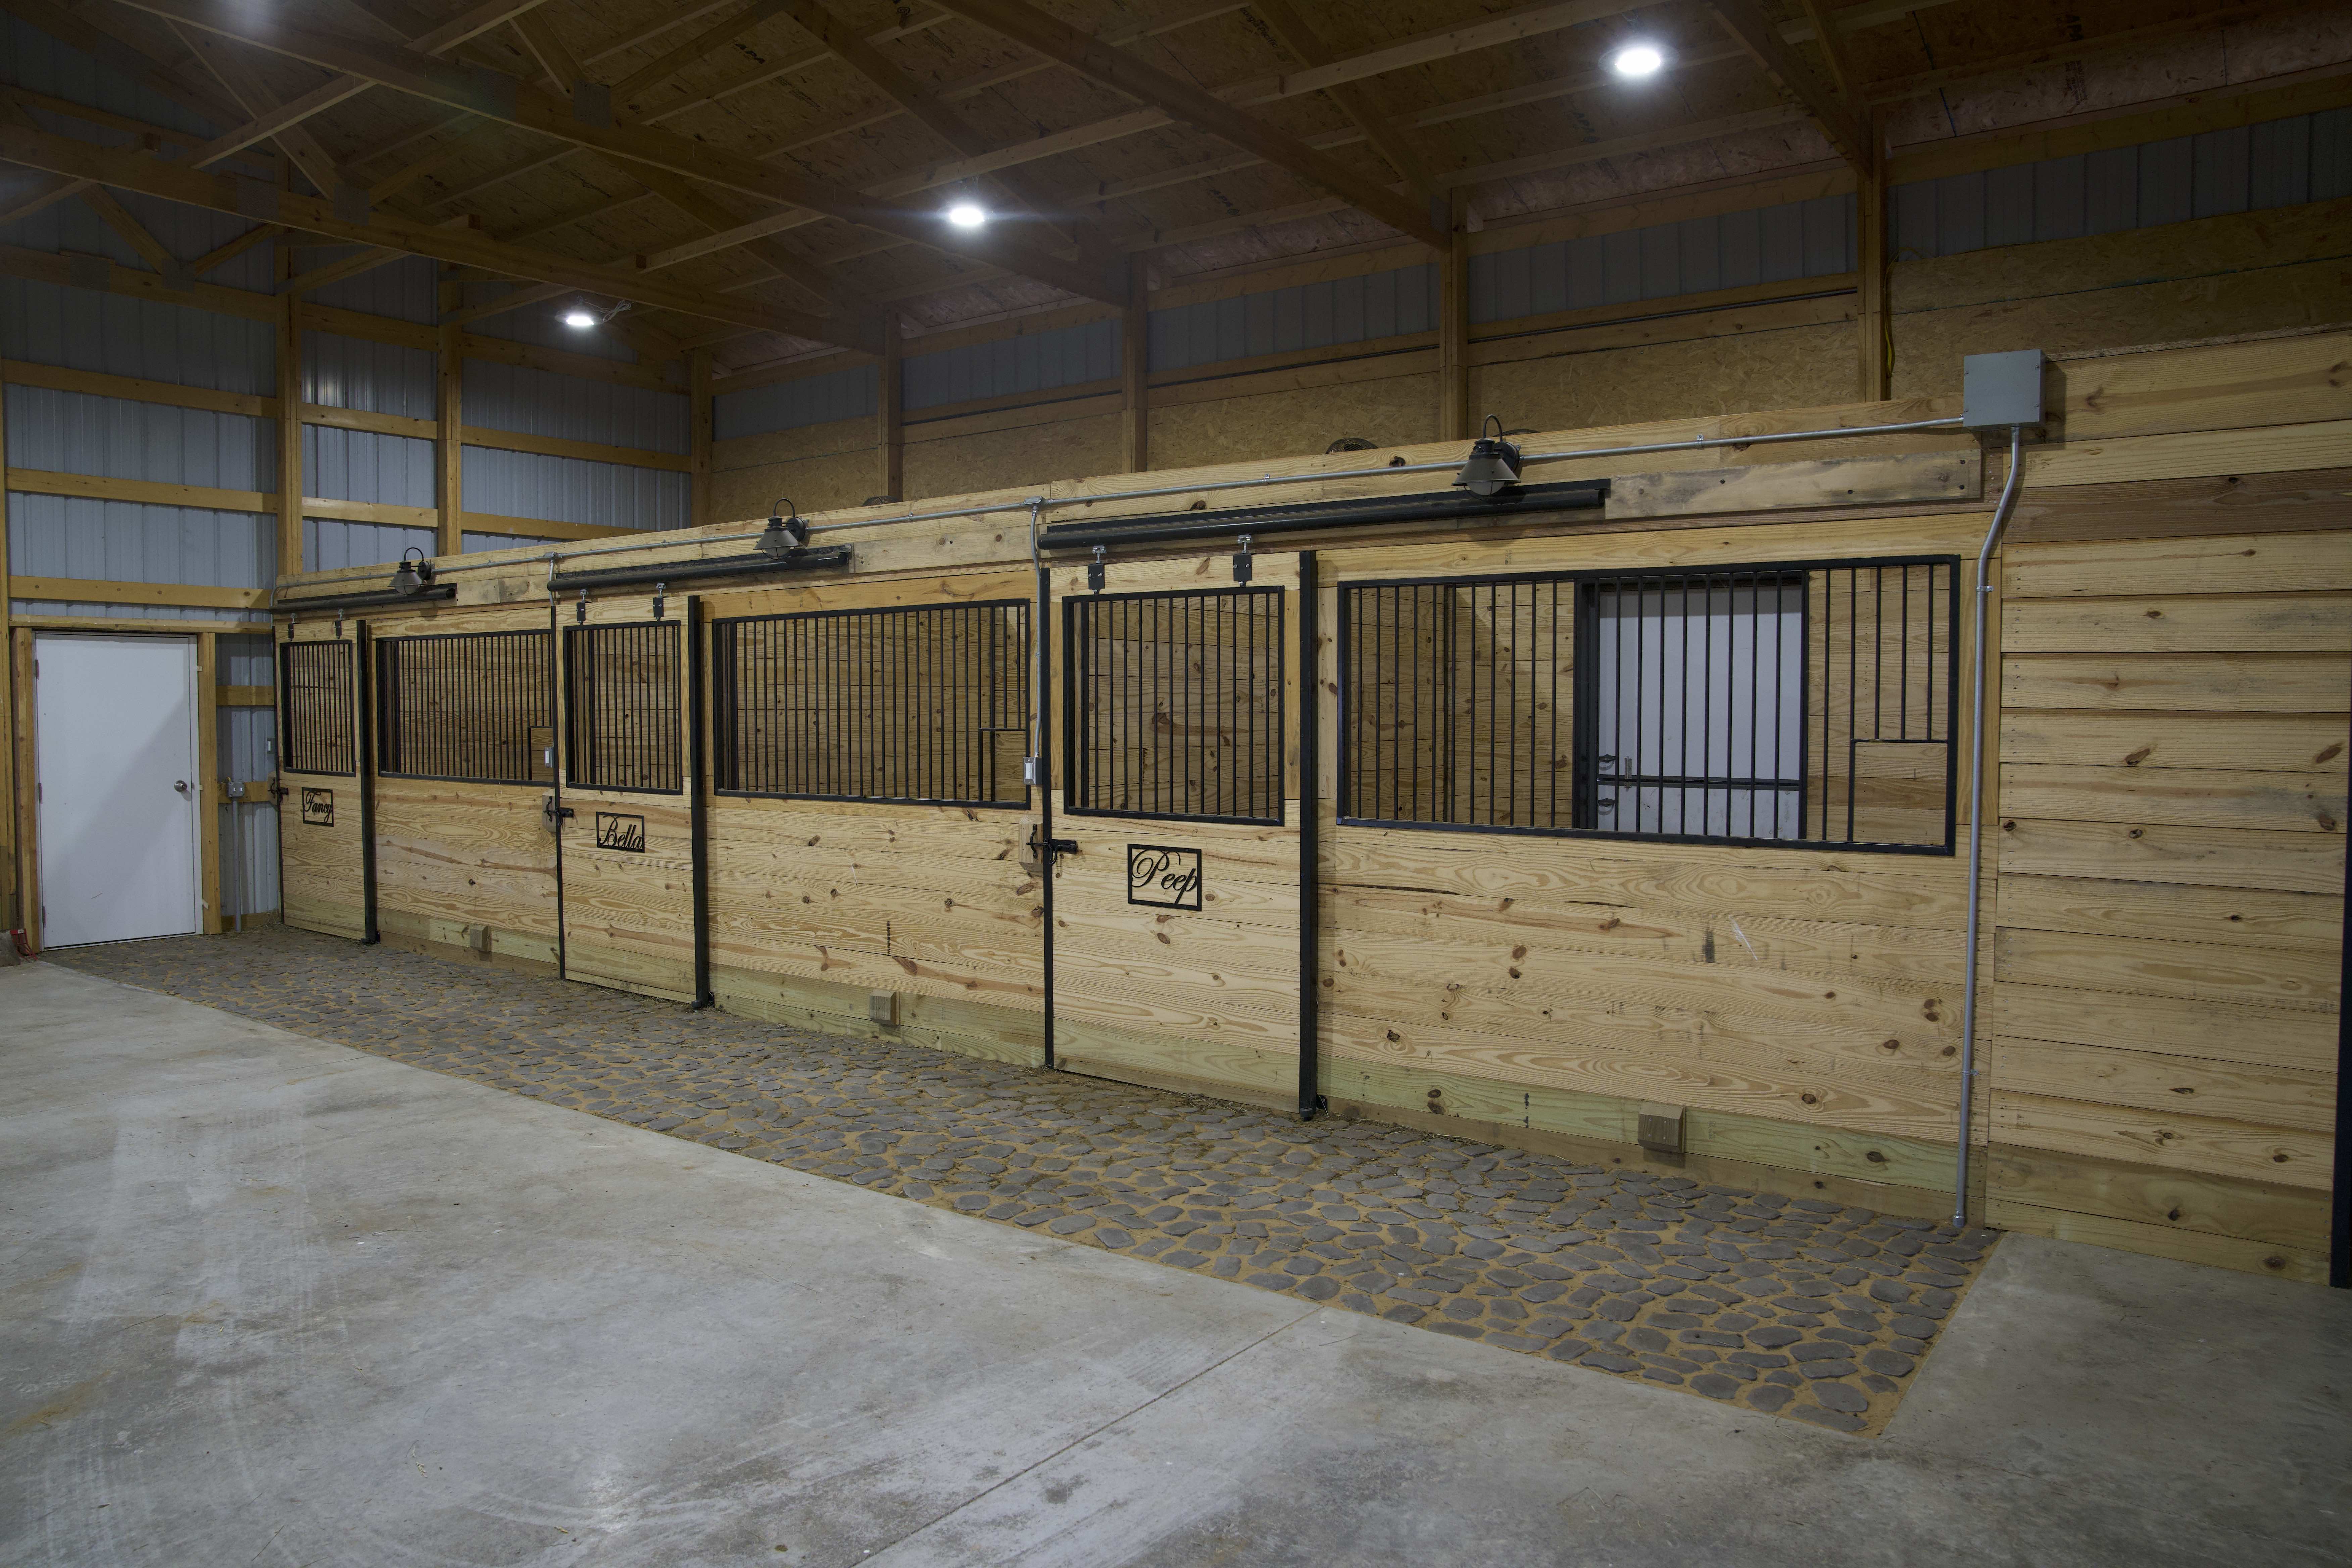 How Big Should a Horse Stall Be? 9 Factors to Consider